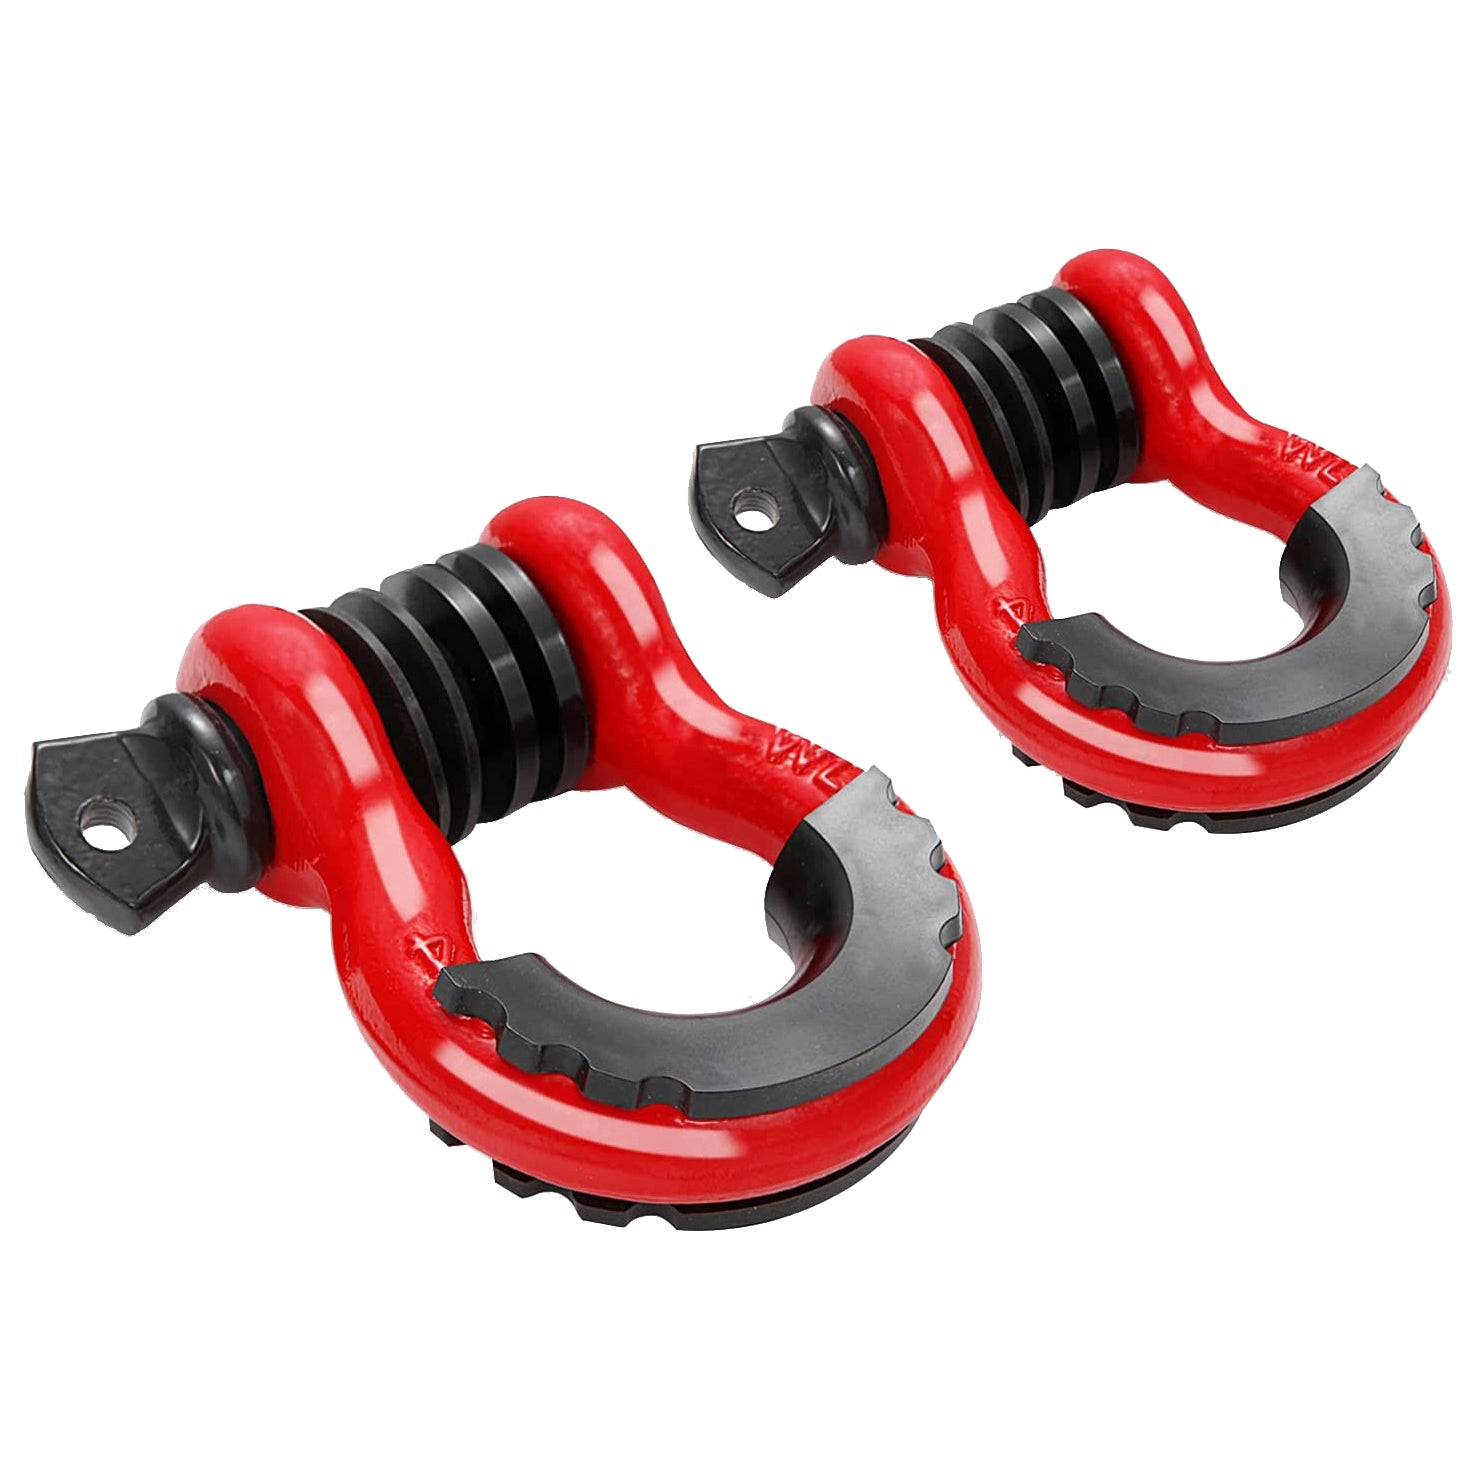 OPENROAD 3/4" D-Ring Shackle 4.75 Ton (9500 Lbs) Capacity with Isolators & Washer Kit for Jeep Truck Vehicle  openroad4wd.com red  